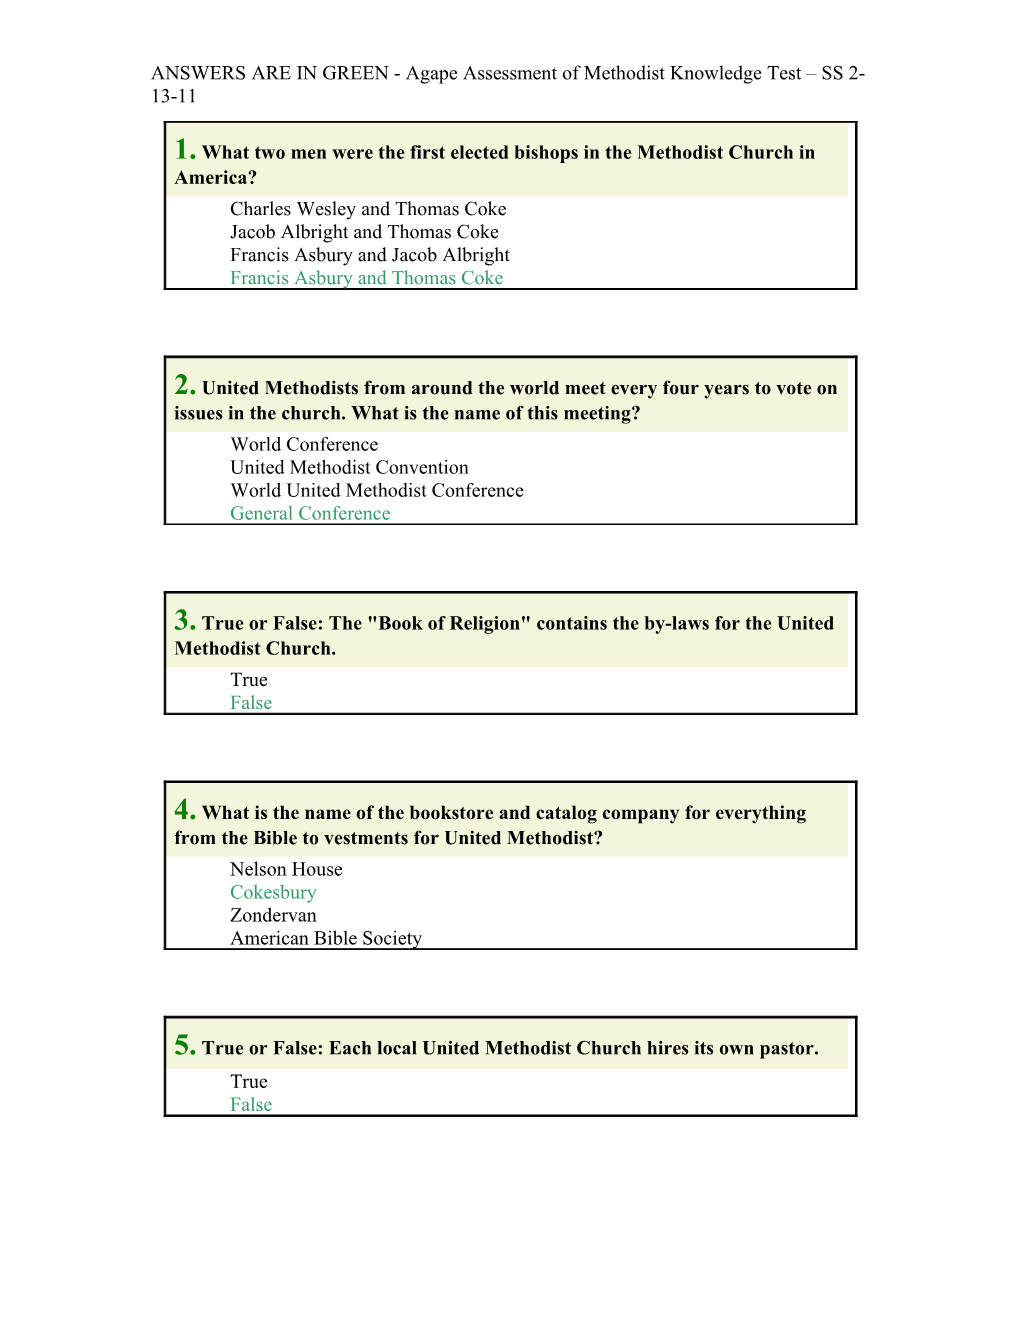 ANSWERS ARE in GREEN - Agape Assessment of Methodist Knowledge Test SS 2-13-11